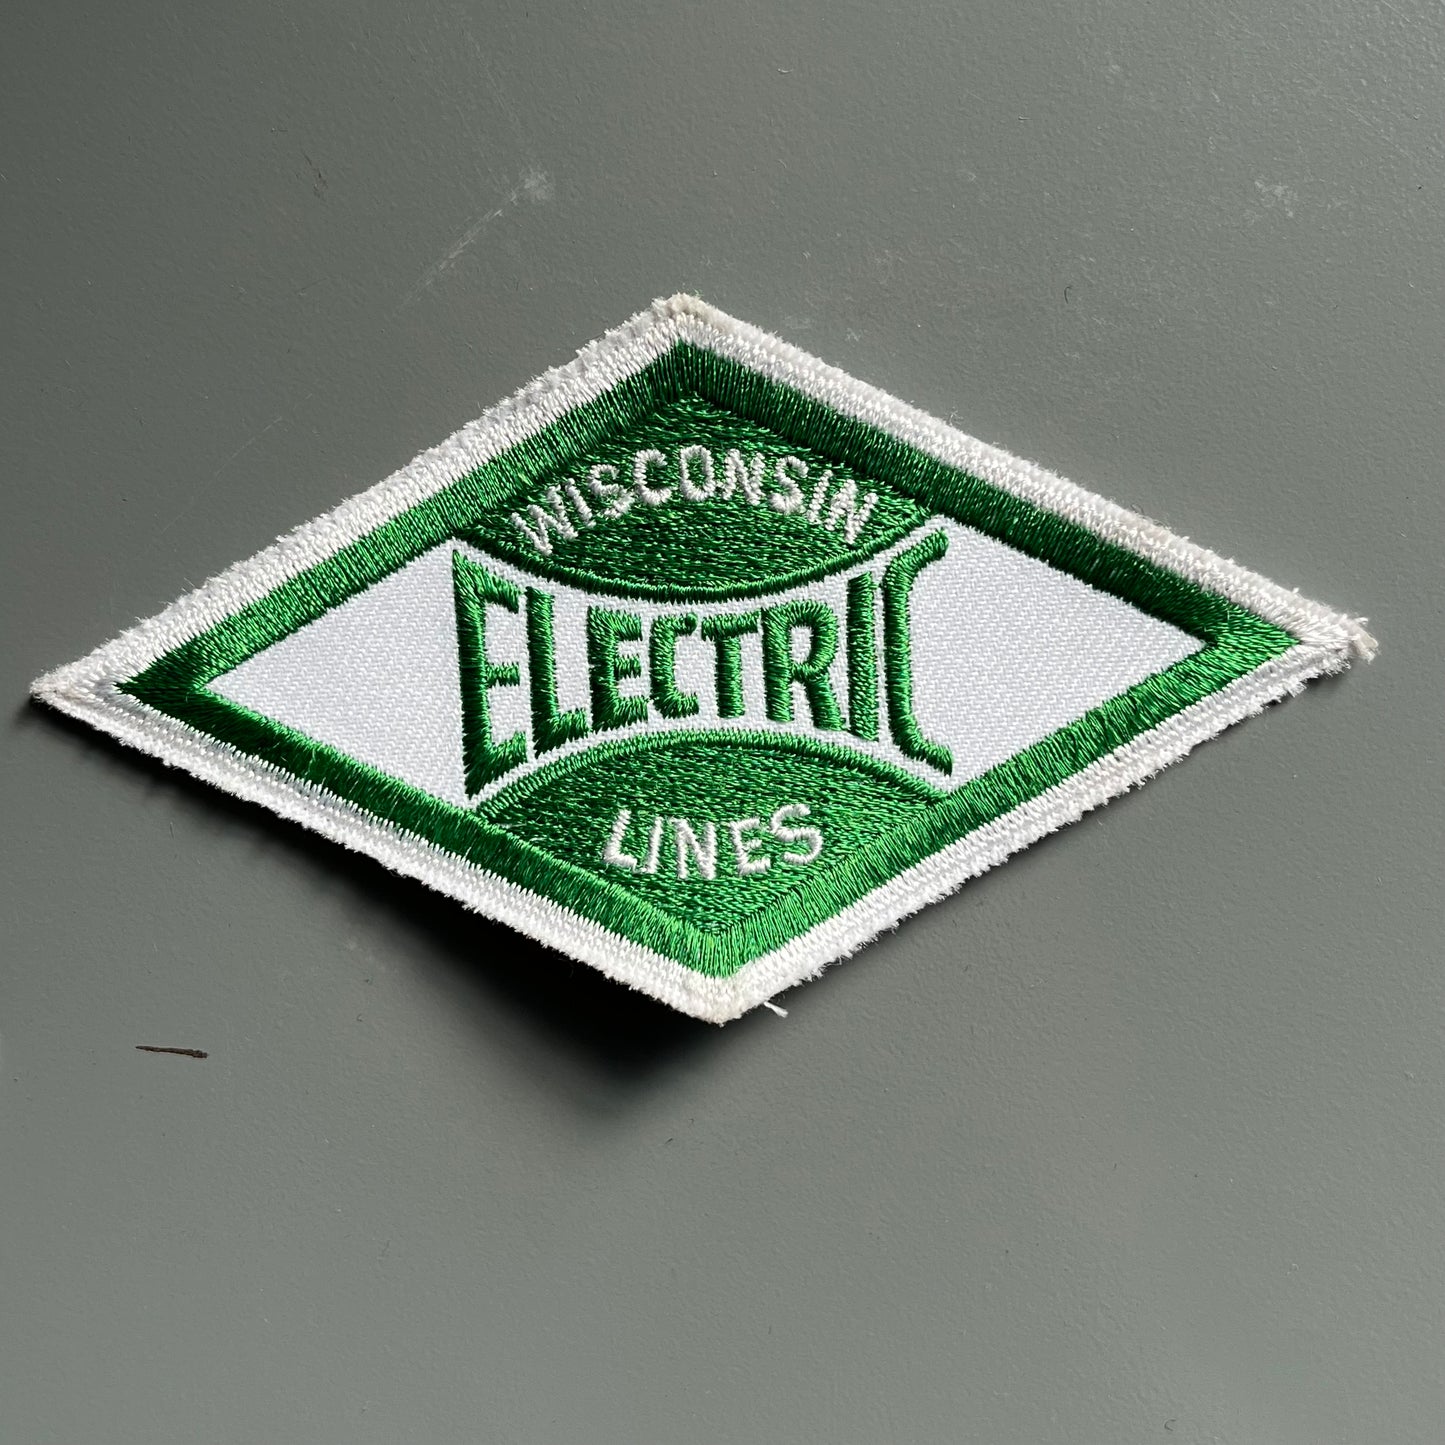 【USA vintage】WISCONSIN ELECTRIC LINES ワッペン